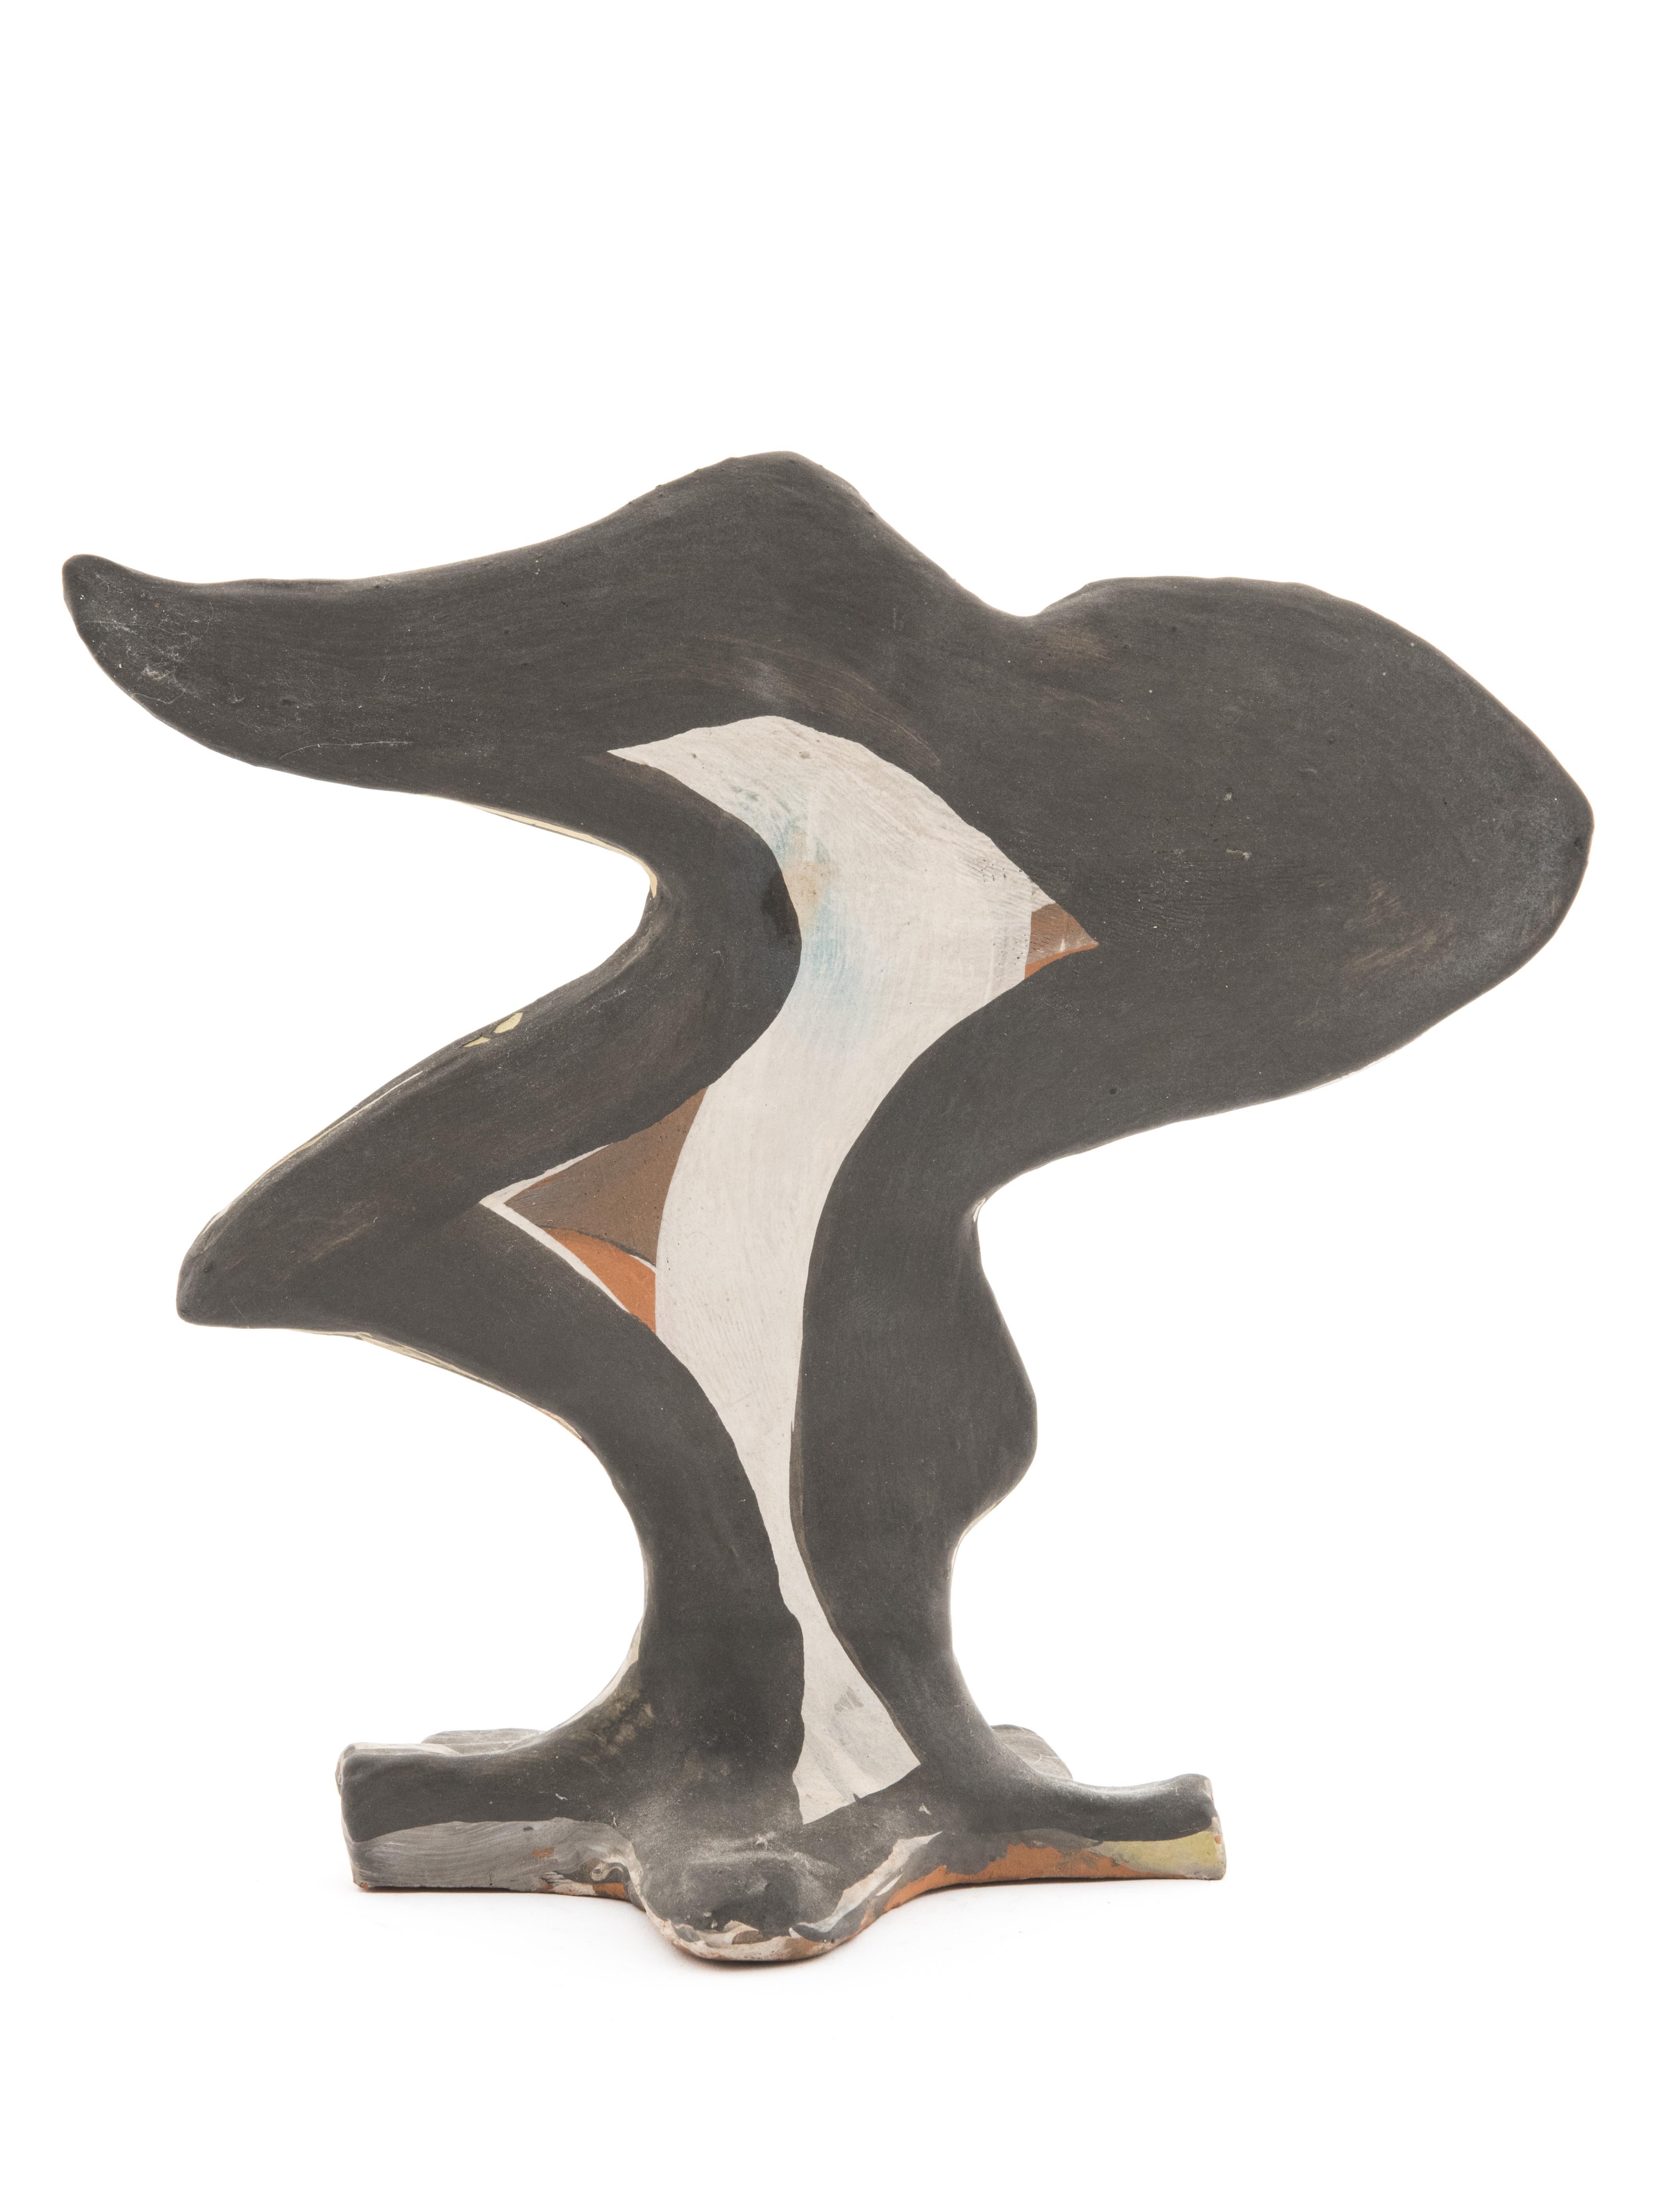 Hand painted abstract sculpture in Vallaruis terracotta by Jules Agard from the 1950s. 

About the artist 
Jules Agard (1905-1986) was a French ceramist who was already a renowned potter in Vallauris when Suzanne Ramié founded Madoura whom he